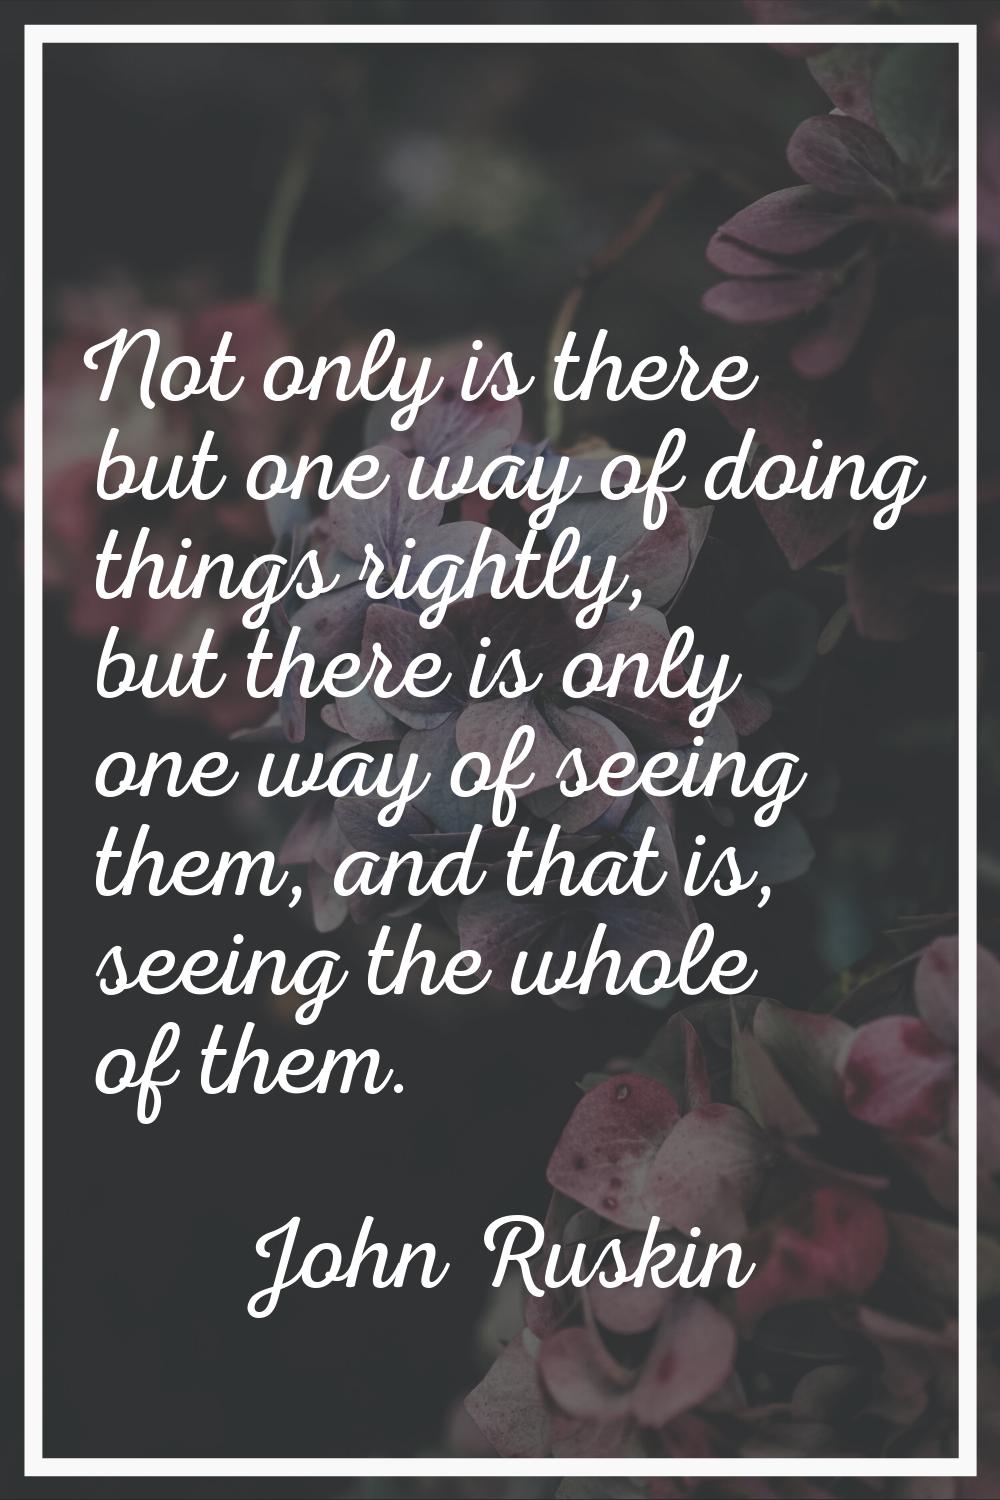 Not only is there but one way of doing things rightly, but there is only one way of seeing them, an